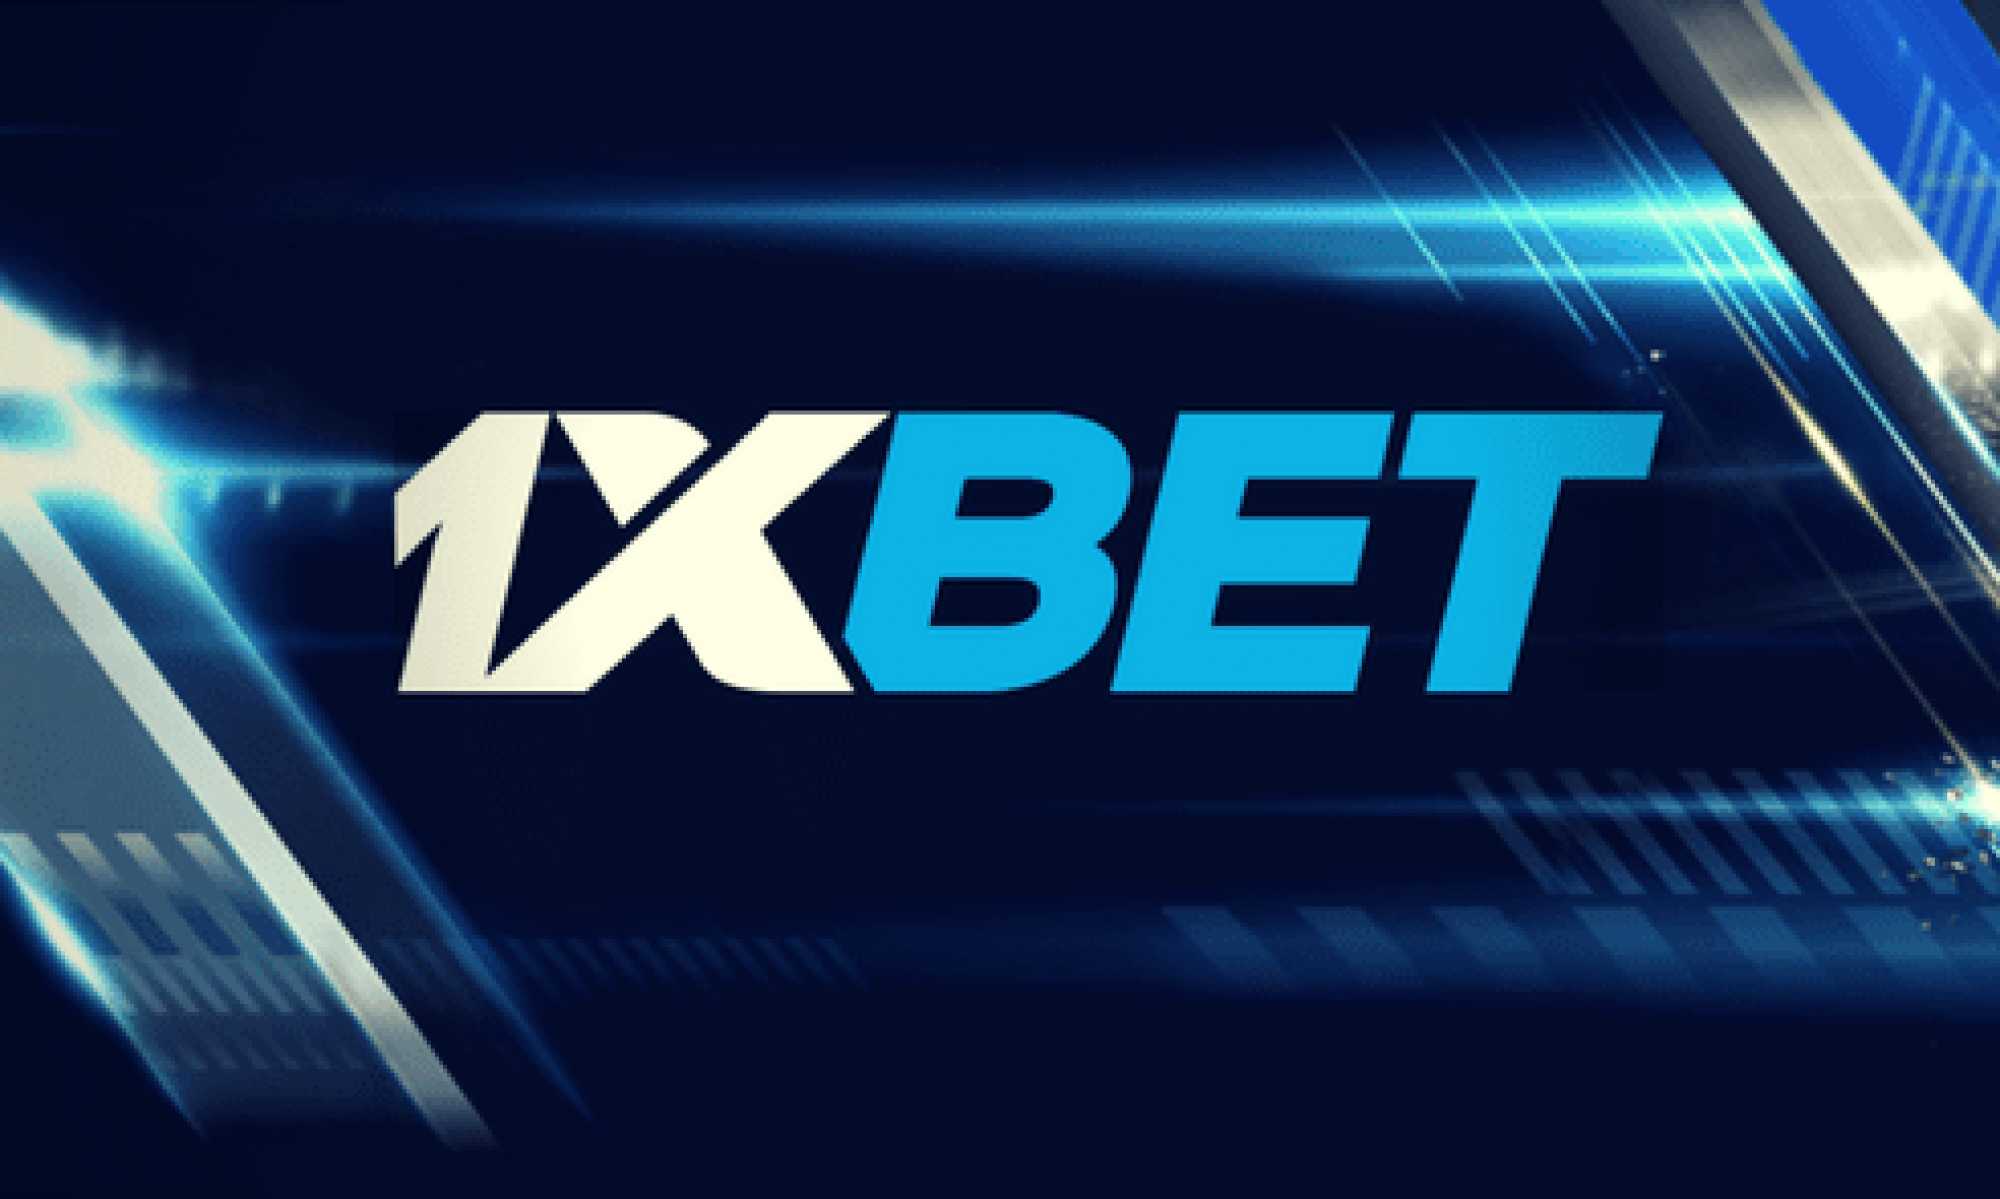 Do you need to download the app to play at 1xBet?